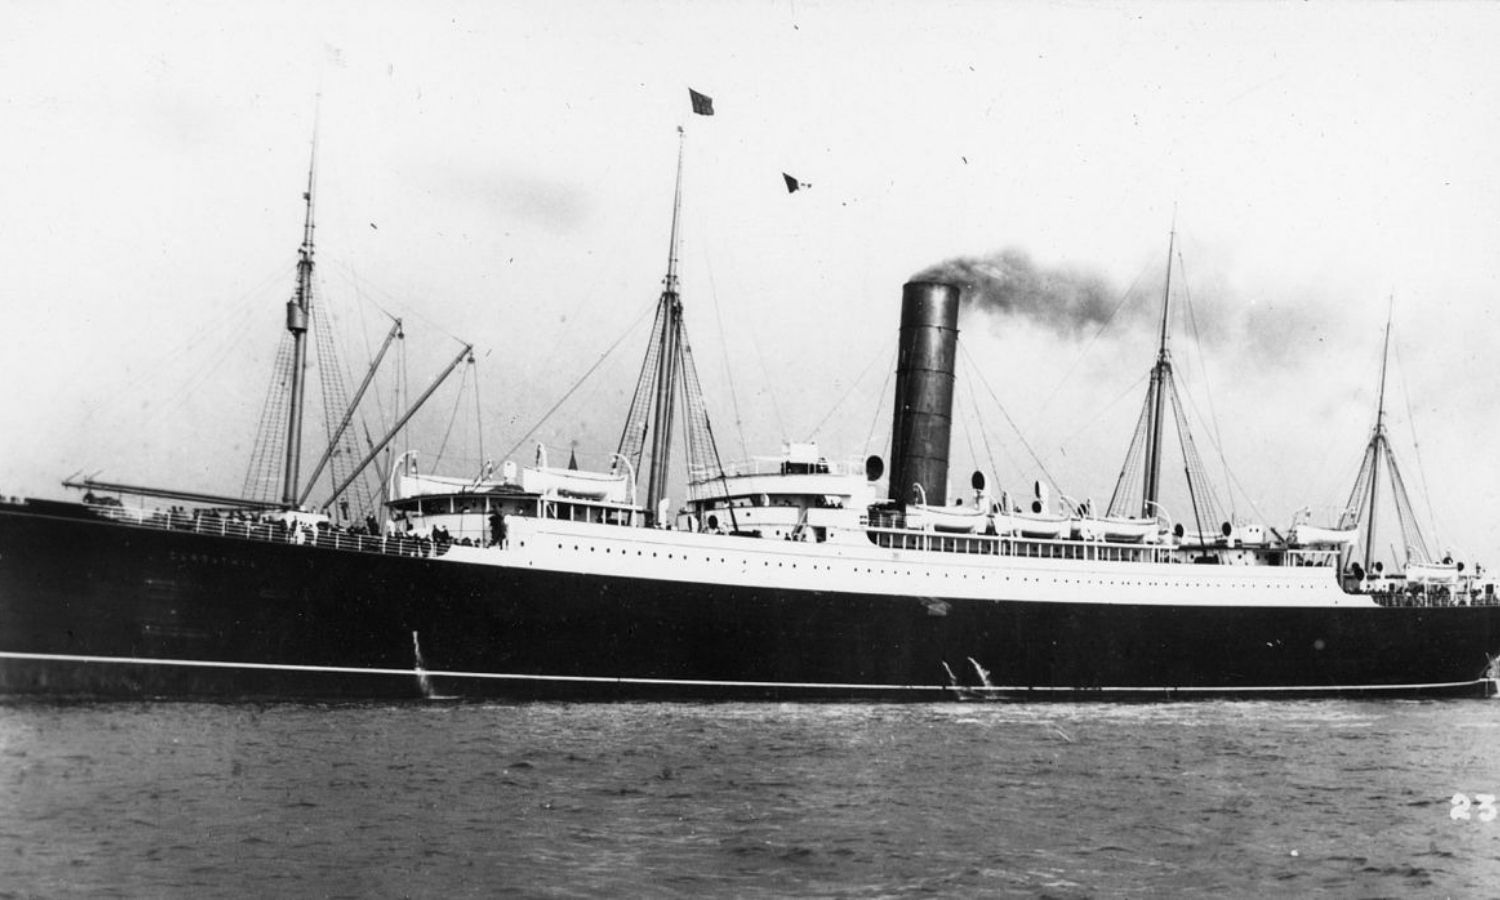 OTD in 1912: 705 survivors of the Titanic arrived in New York City on board the Cunard Liner Carpathia.